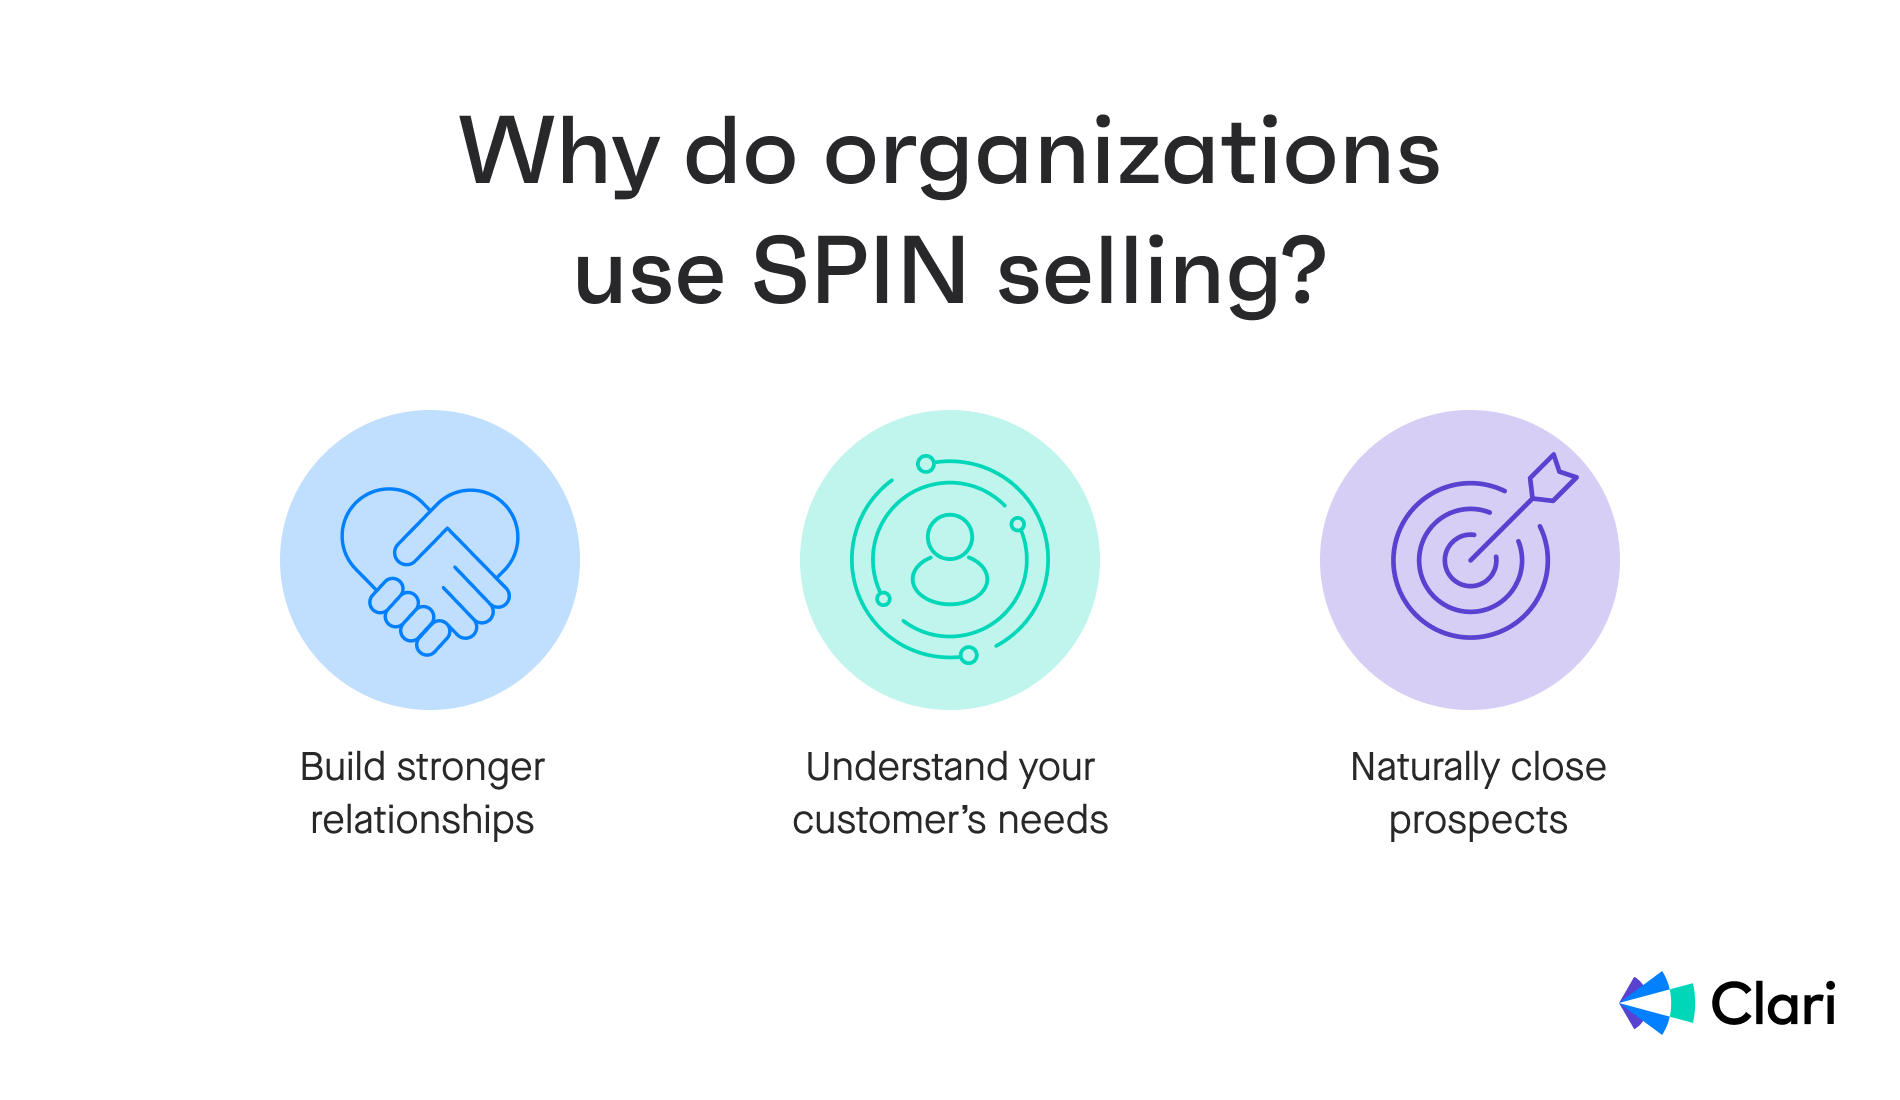 Why do organizations use SPIN selling?